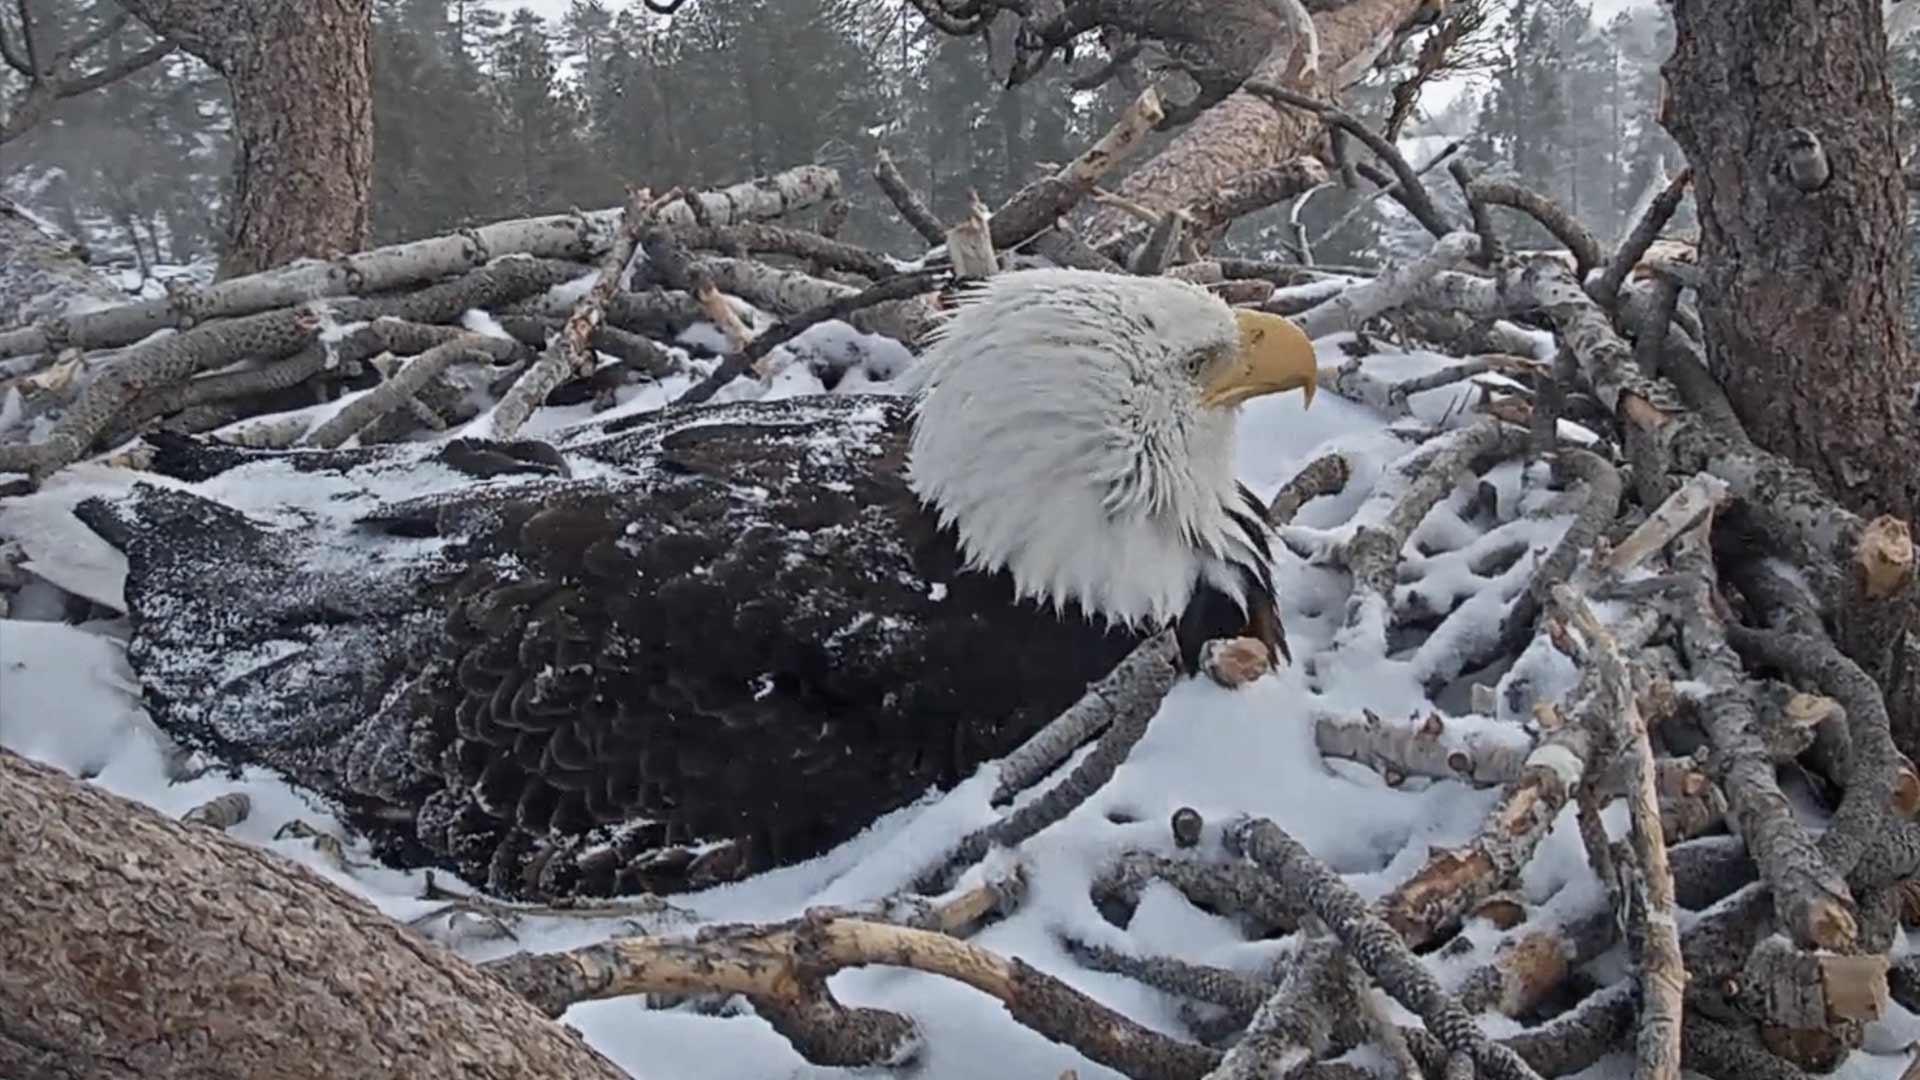 Forest Officials Keep Close Watch to Protect Bald Eagle After She Lays Egg